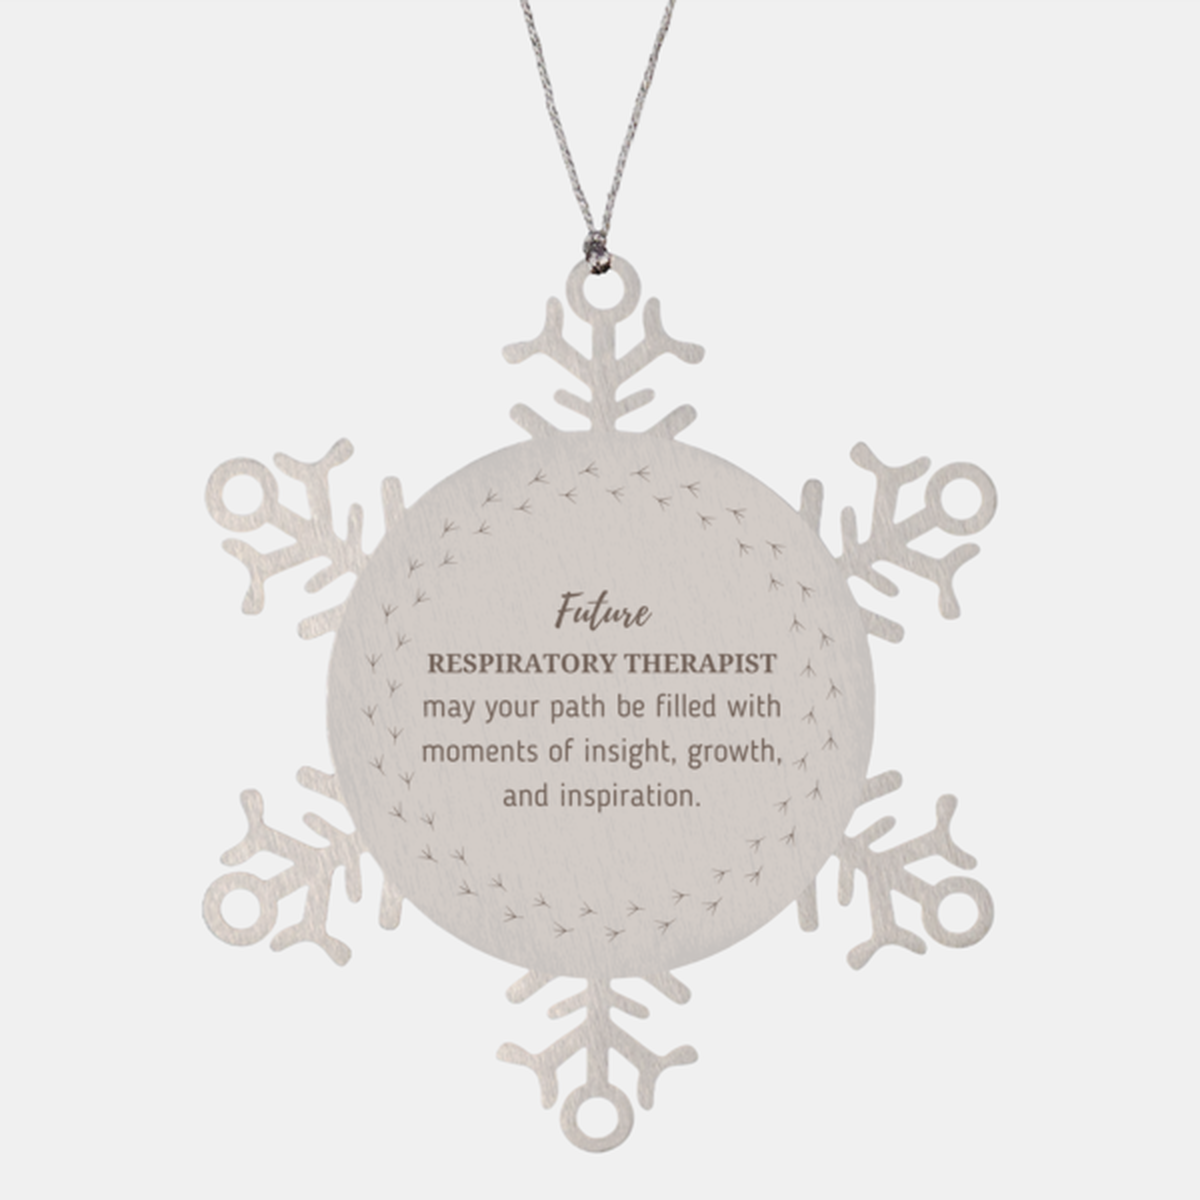 Future Respiratory Therapist Gifts, May your path be filled with moments of insight, Graduation Gifts for New Respiratory Therapist, Christmas Unique Snowflake Ornament For Men, Women, Friends